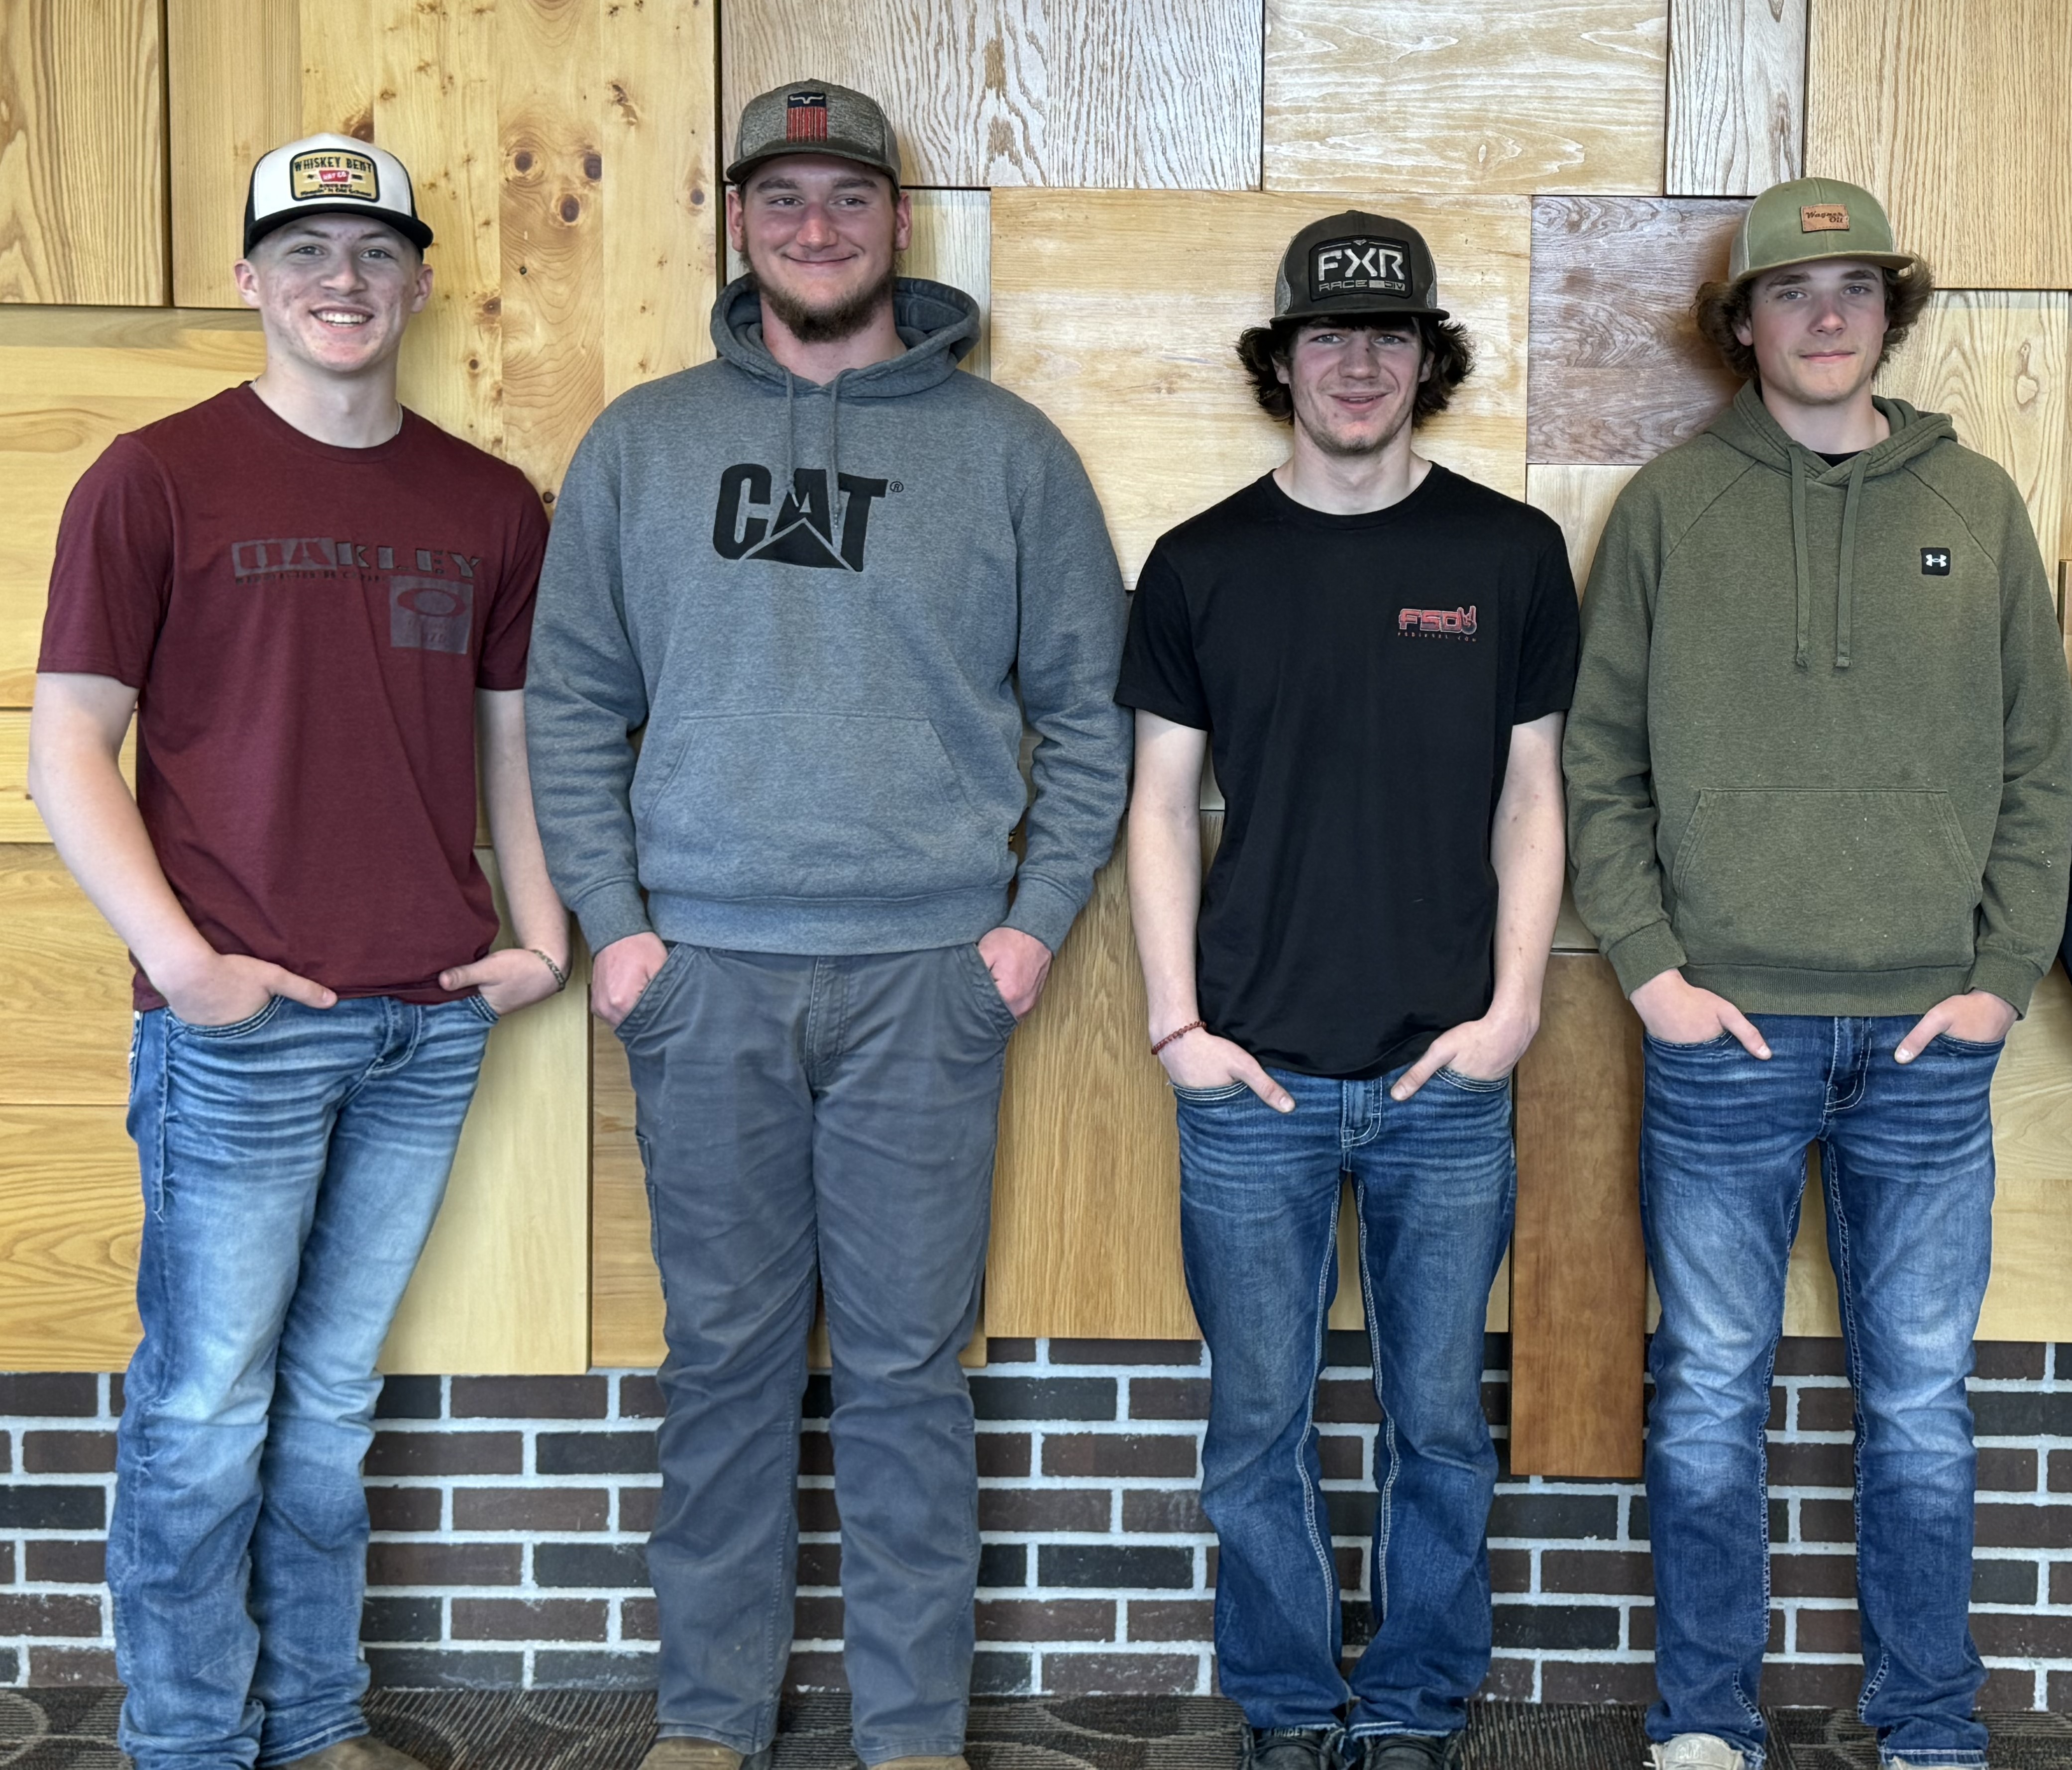 Antigo Advanced Welding Academy students posing while standing against a wall.